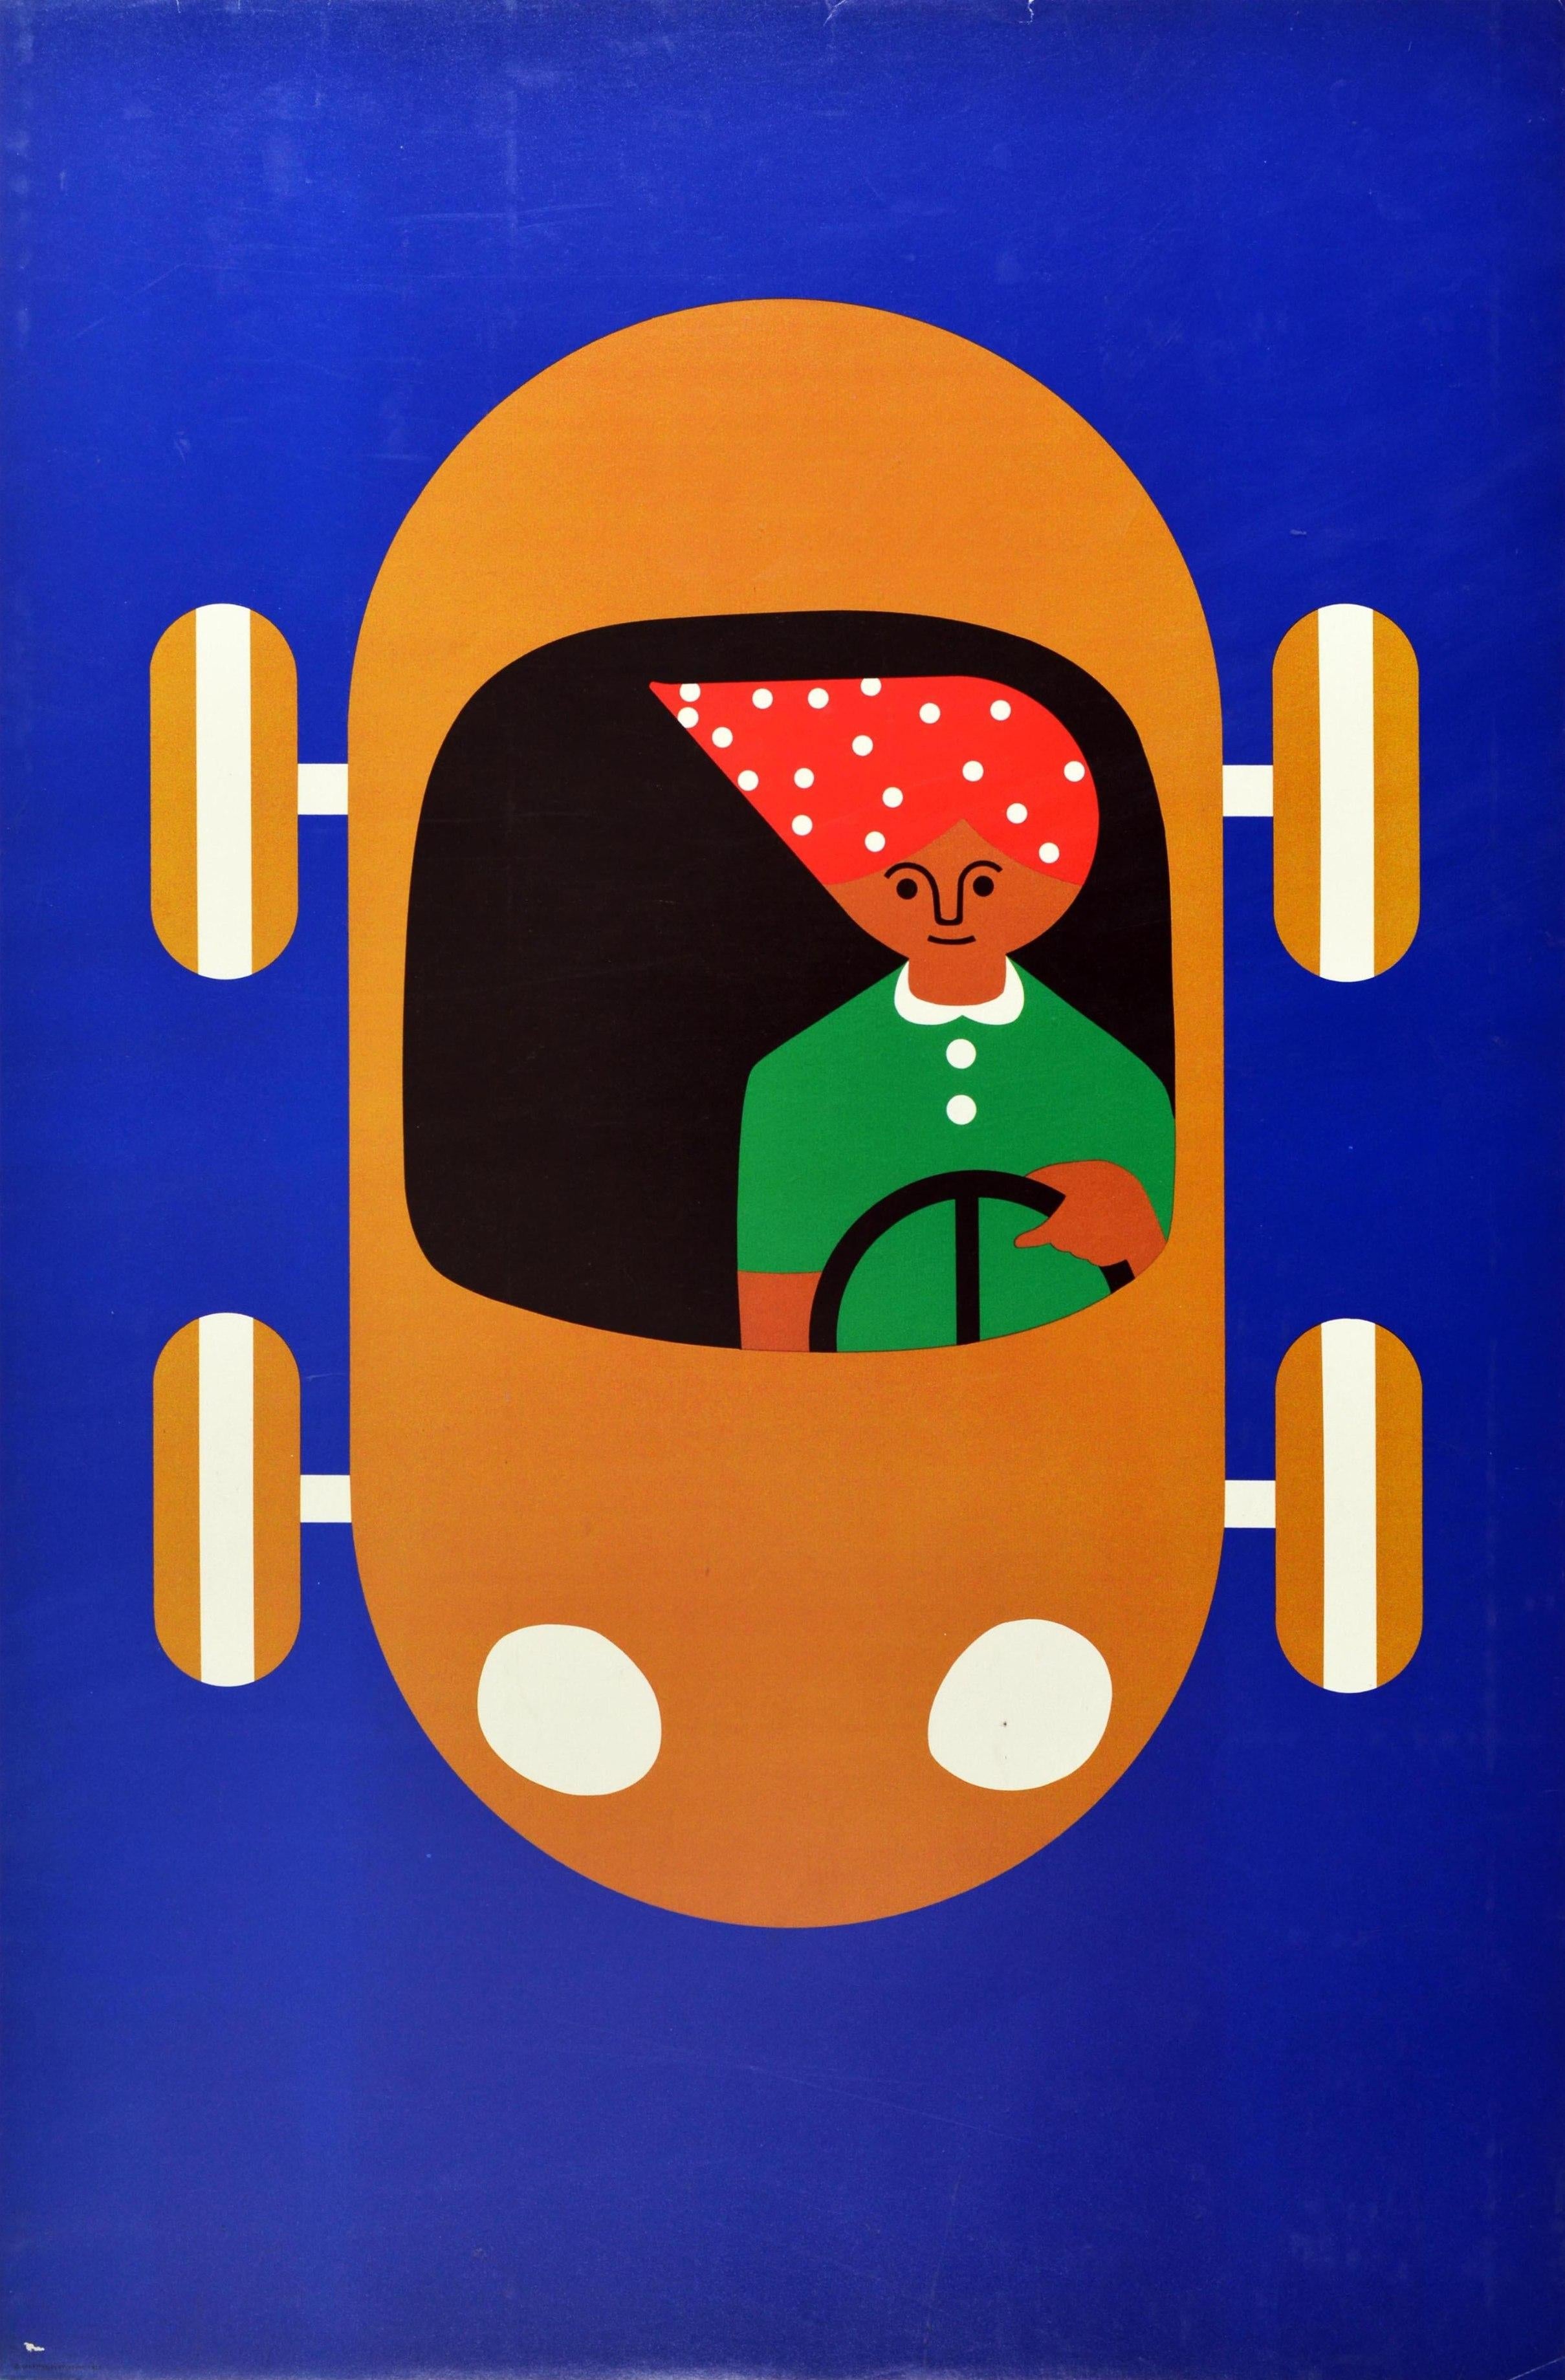 Original vintage advertising poster for the Creative Playthings educational toy shop in Manhattan New York featuring a fun and colourful graphic design by the South African toymaker and illustrator Fredun Shapur (b. 1929), showing a smiling child in